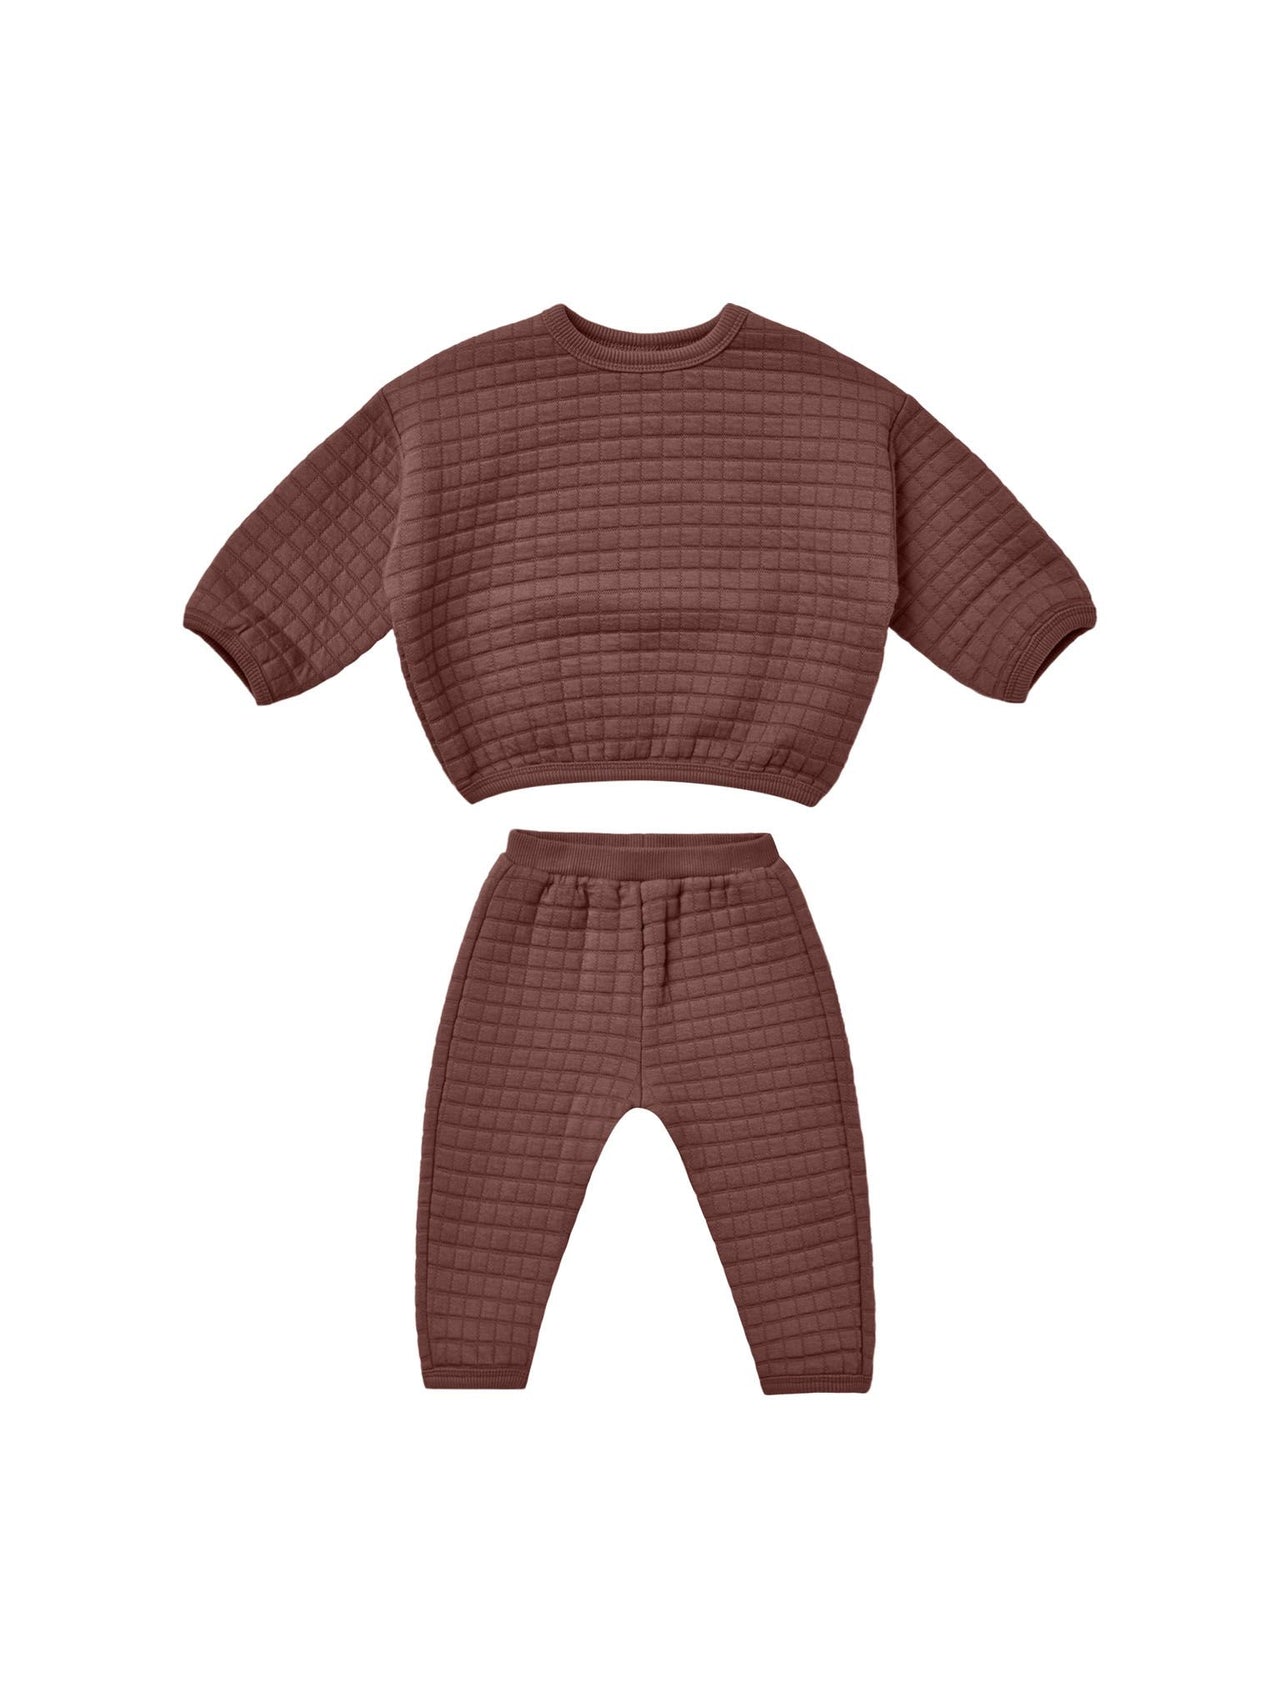 Quincy Mae Quilted Sweater & Pant Set, Plum